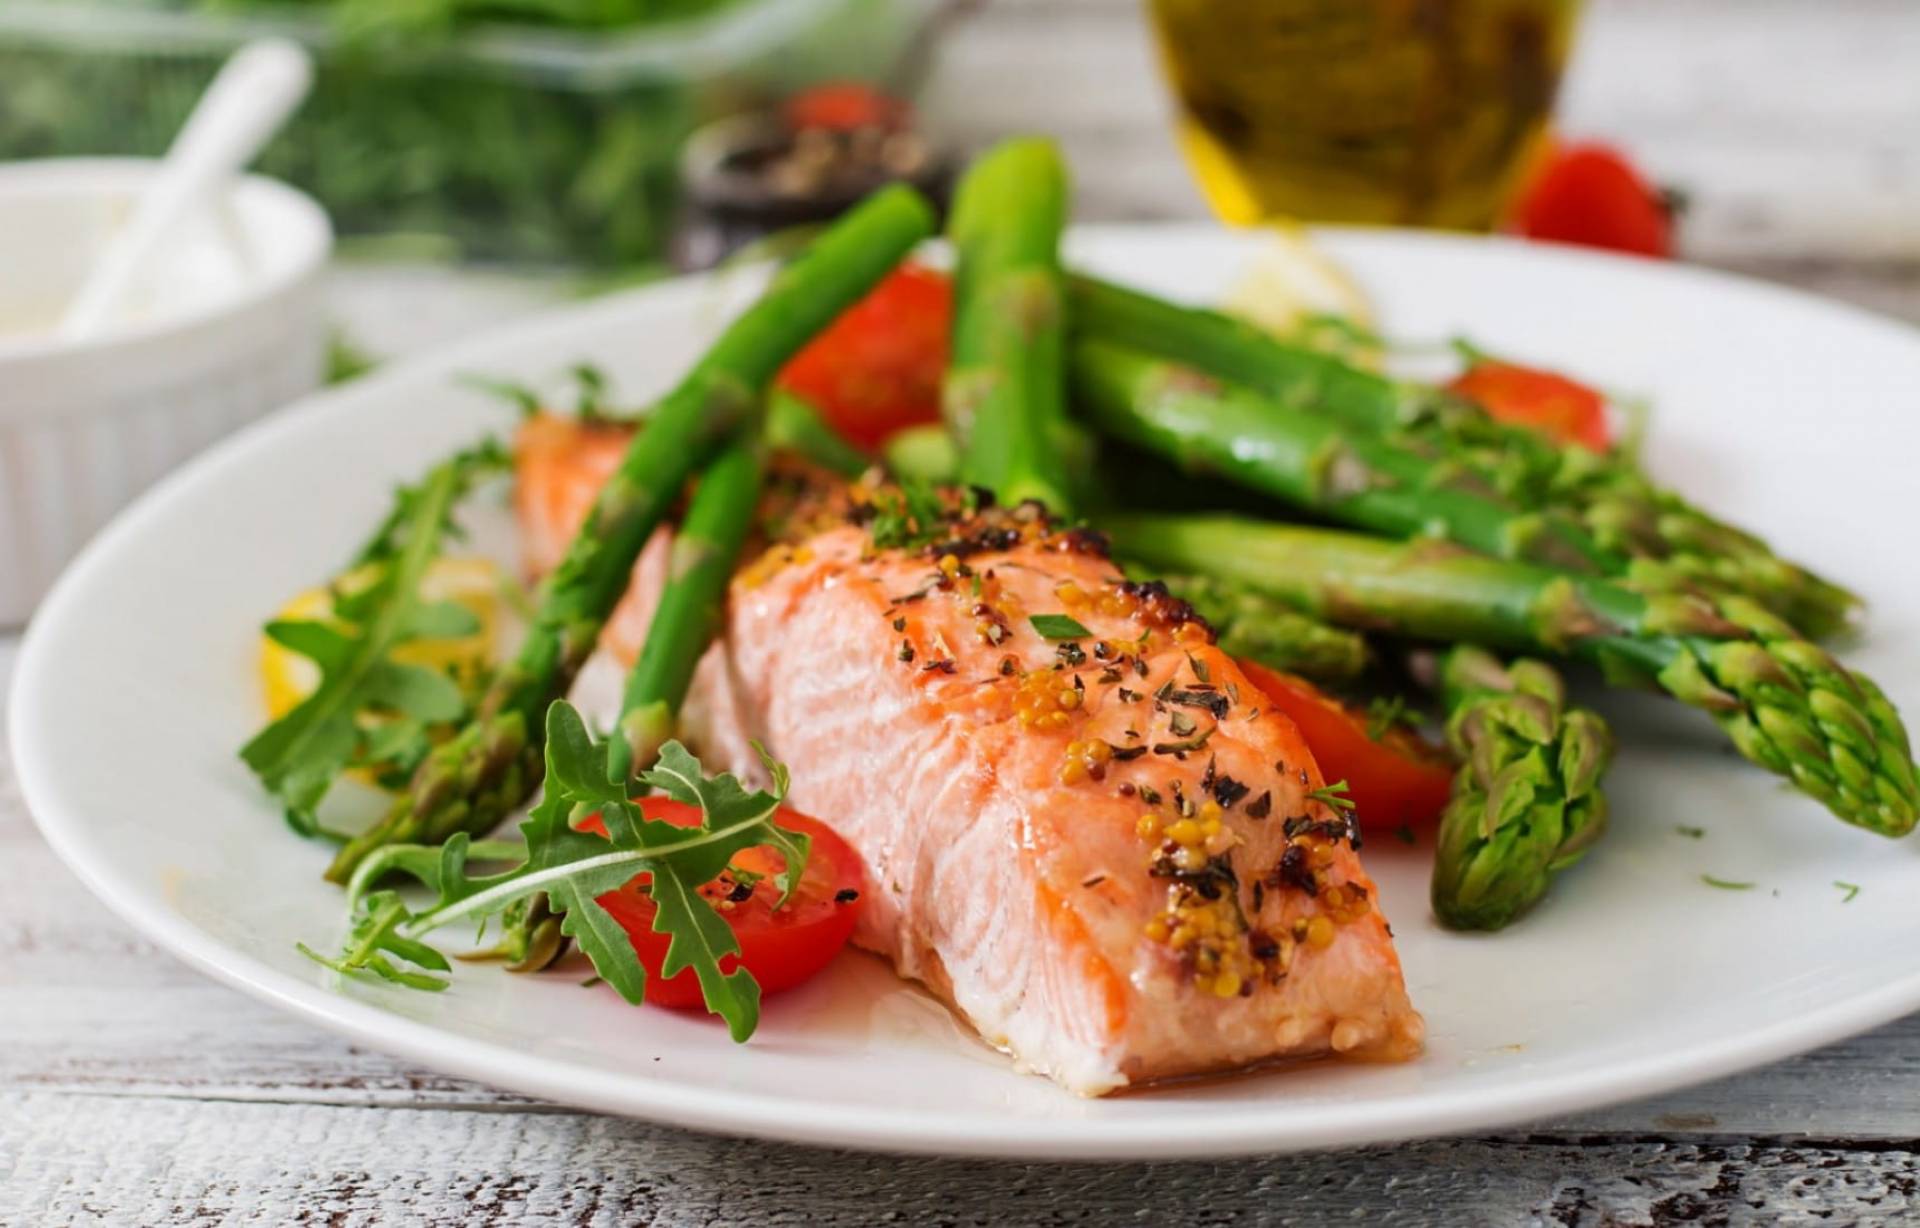 Sweet Chili Salmon with Mashed Sweet Potatoes and Asparagus - Low Fat